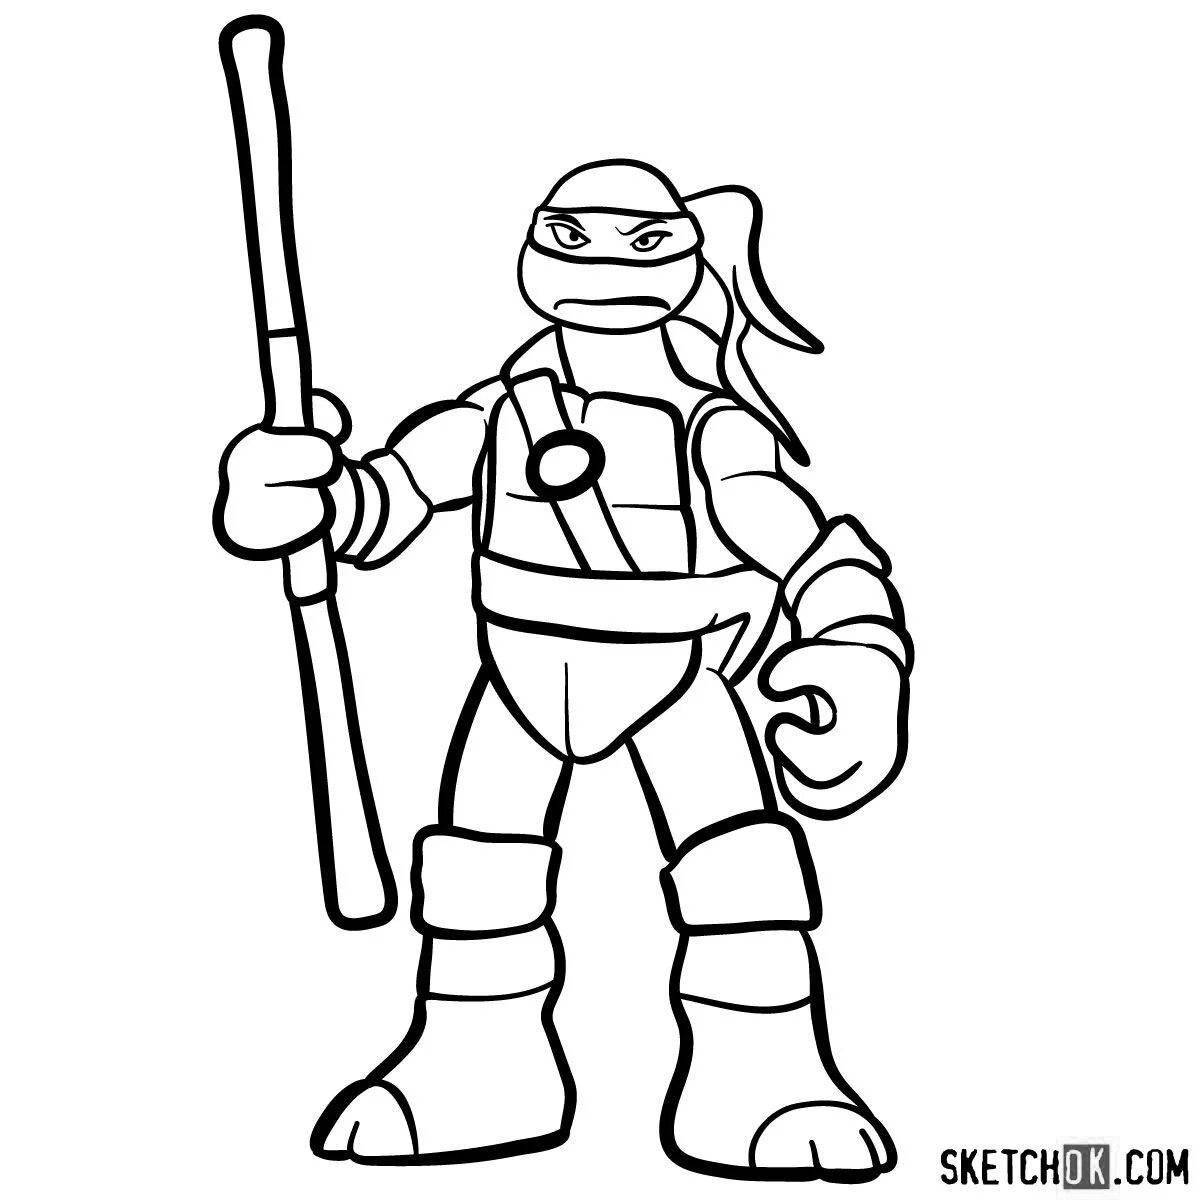 Marvelous donnie turtles coloring book